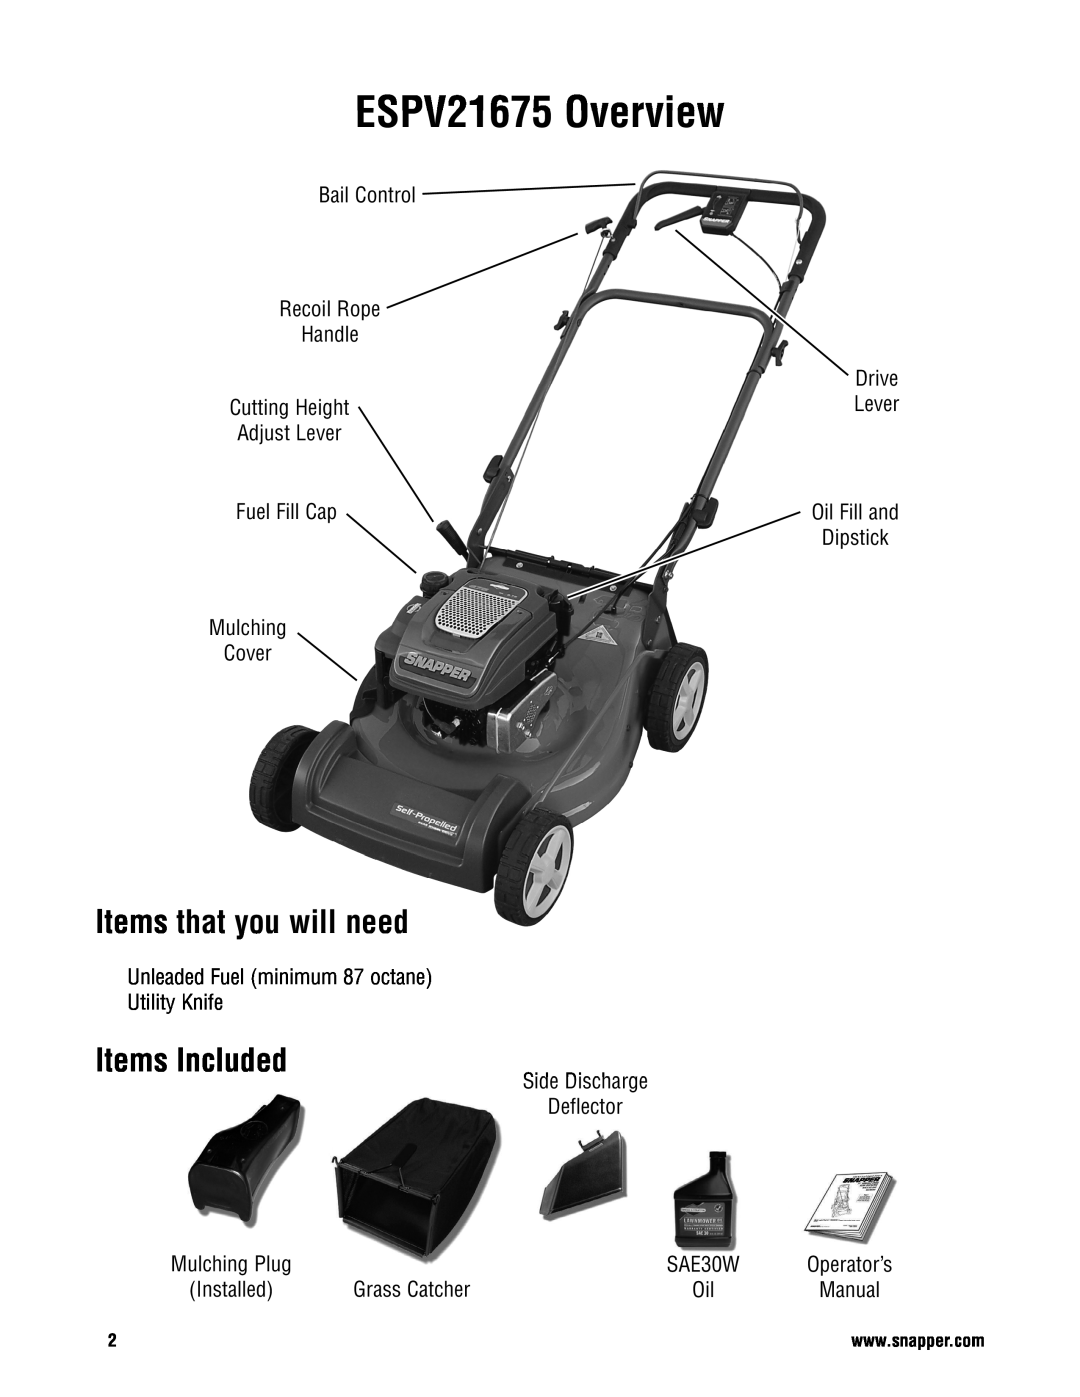 Snapper manual ESPV21675 Overview, Items that you will need, Items Included, SAE30W, Operator’s 